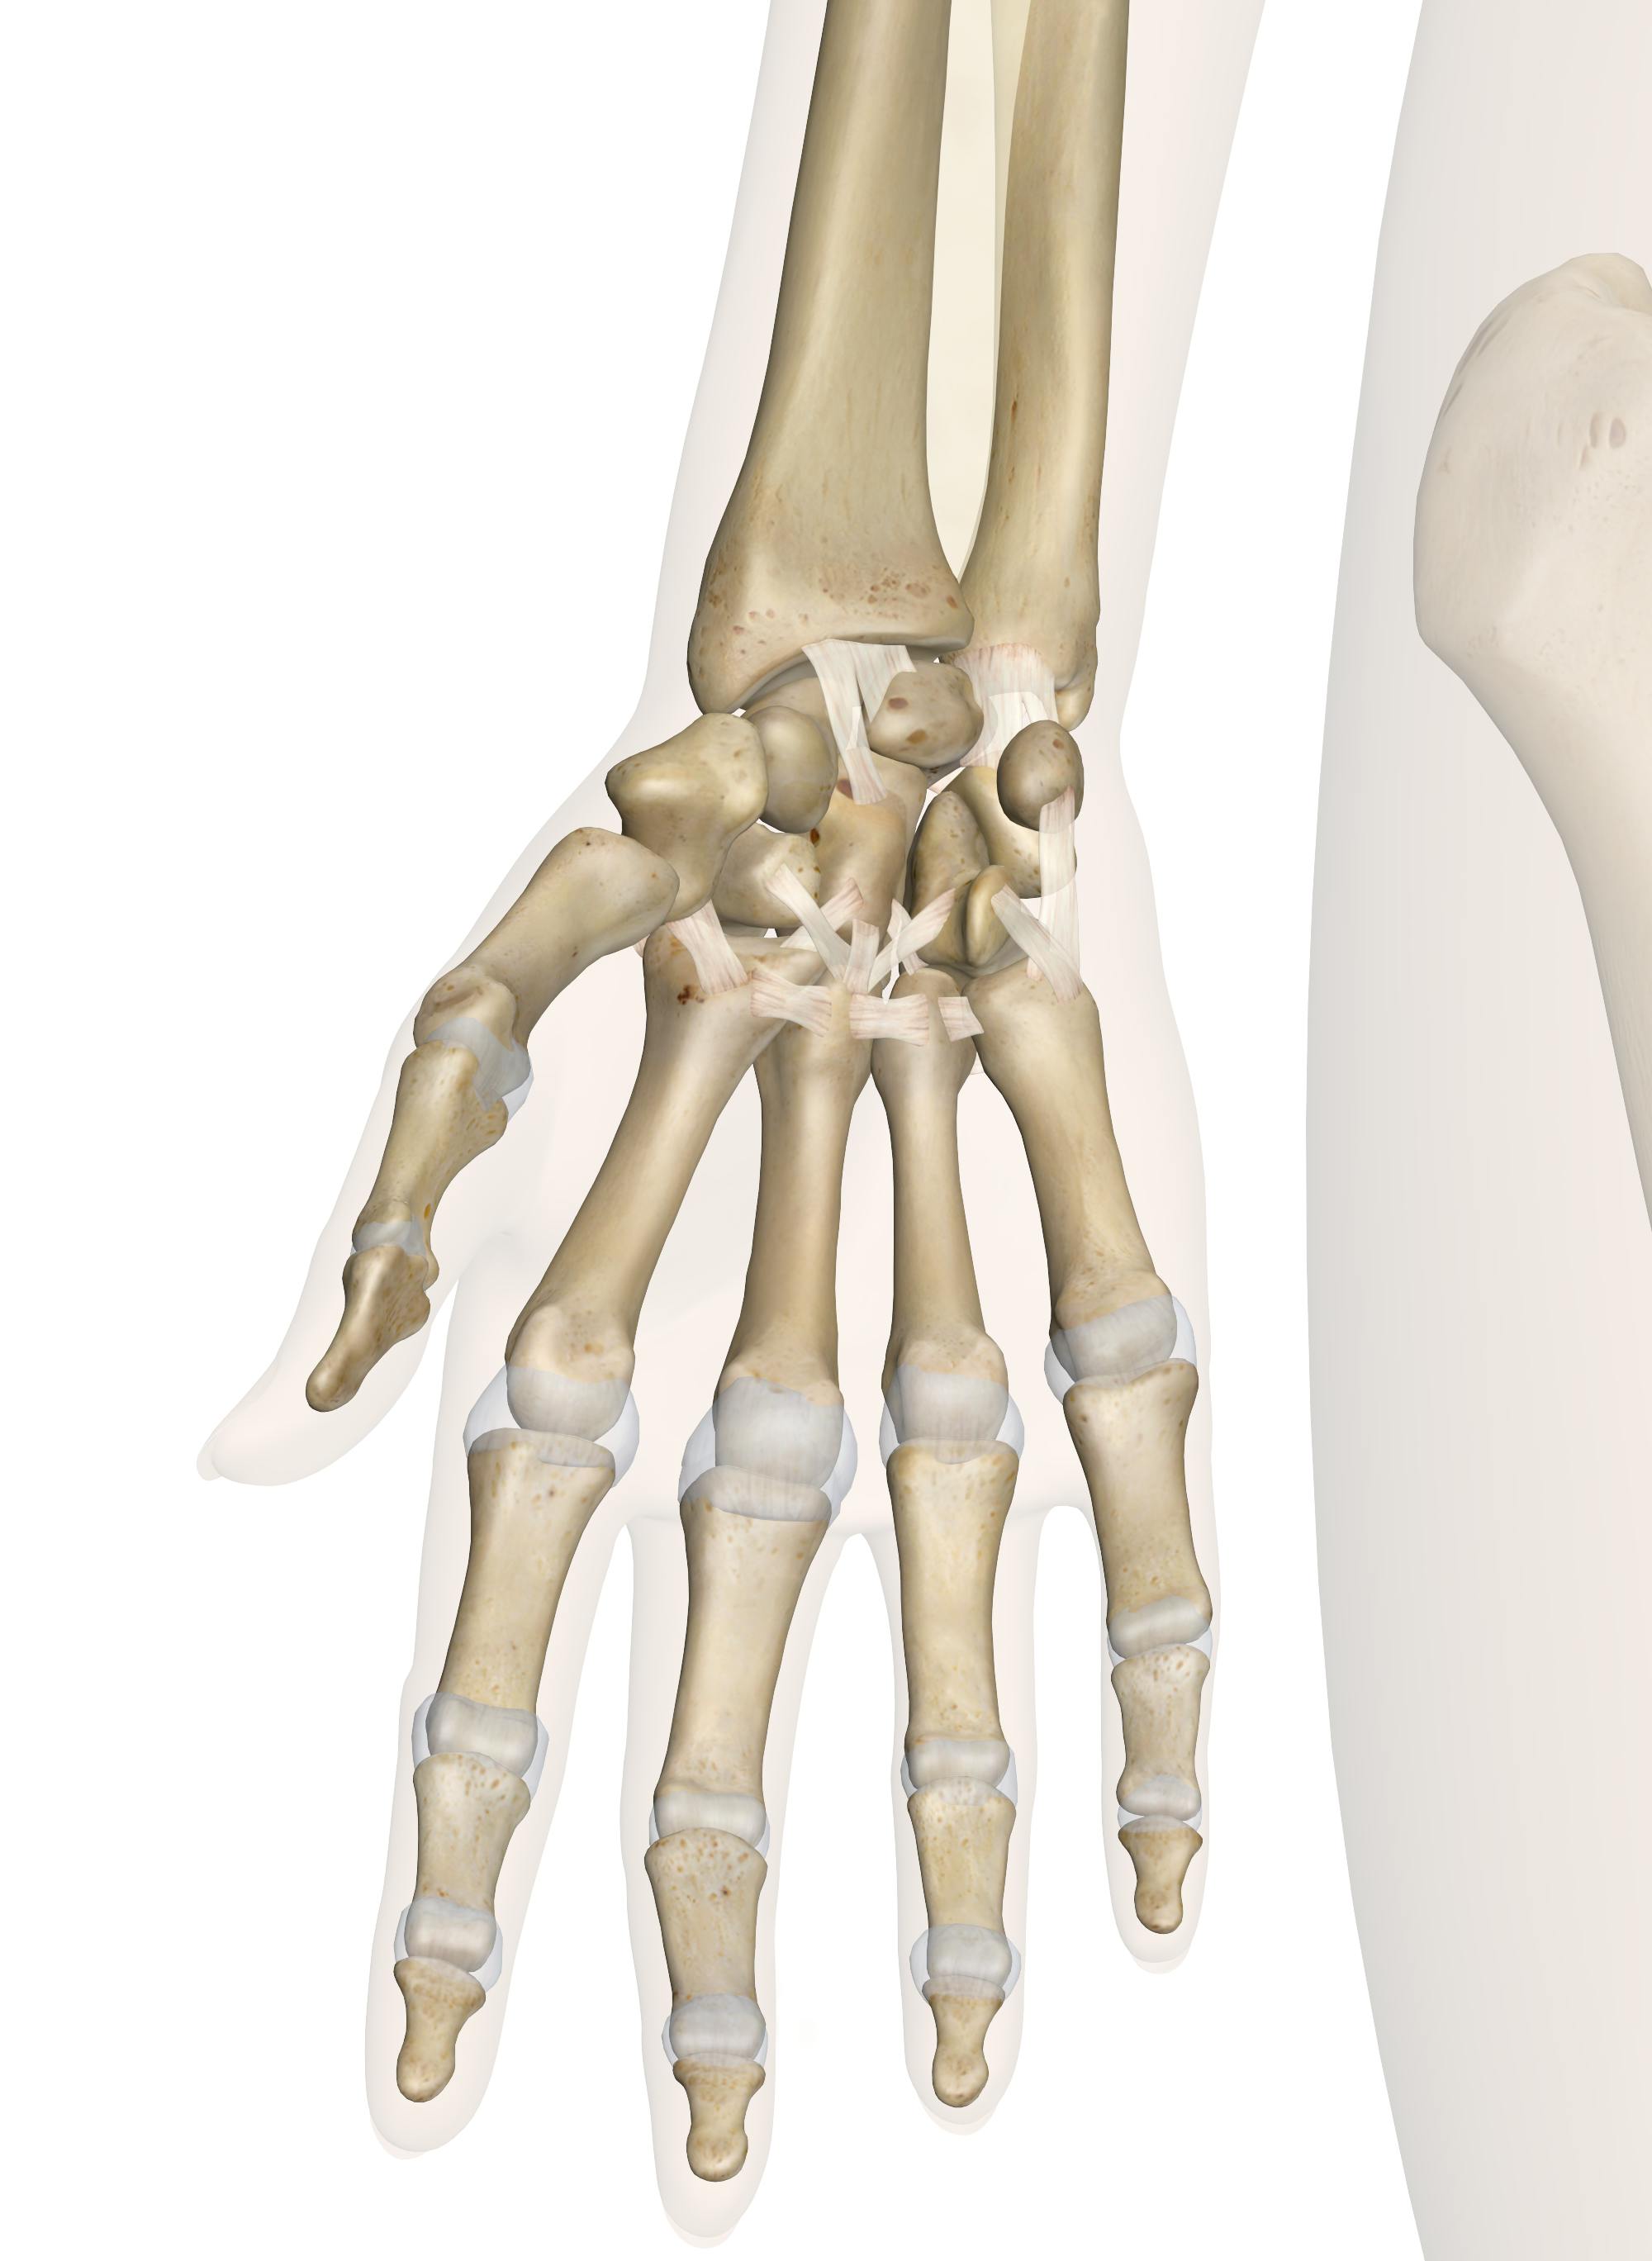 Hand and Wrist - Anatomy Pictures and Information